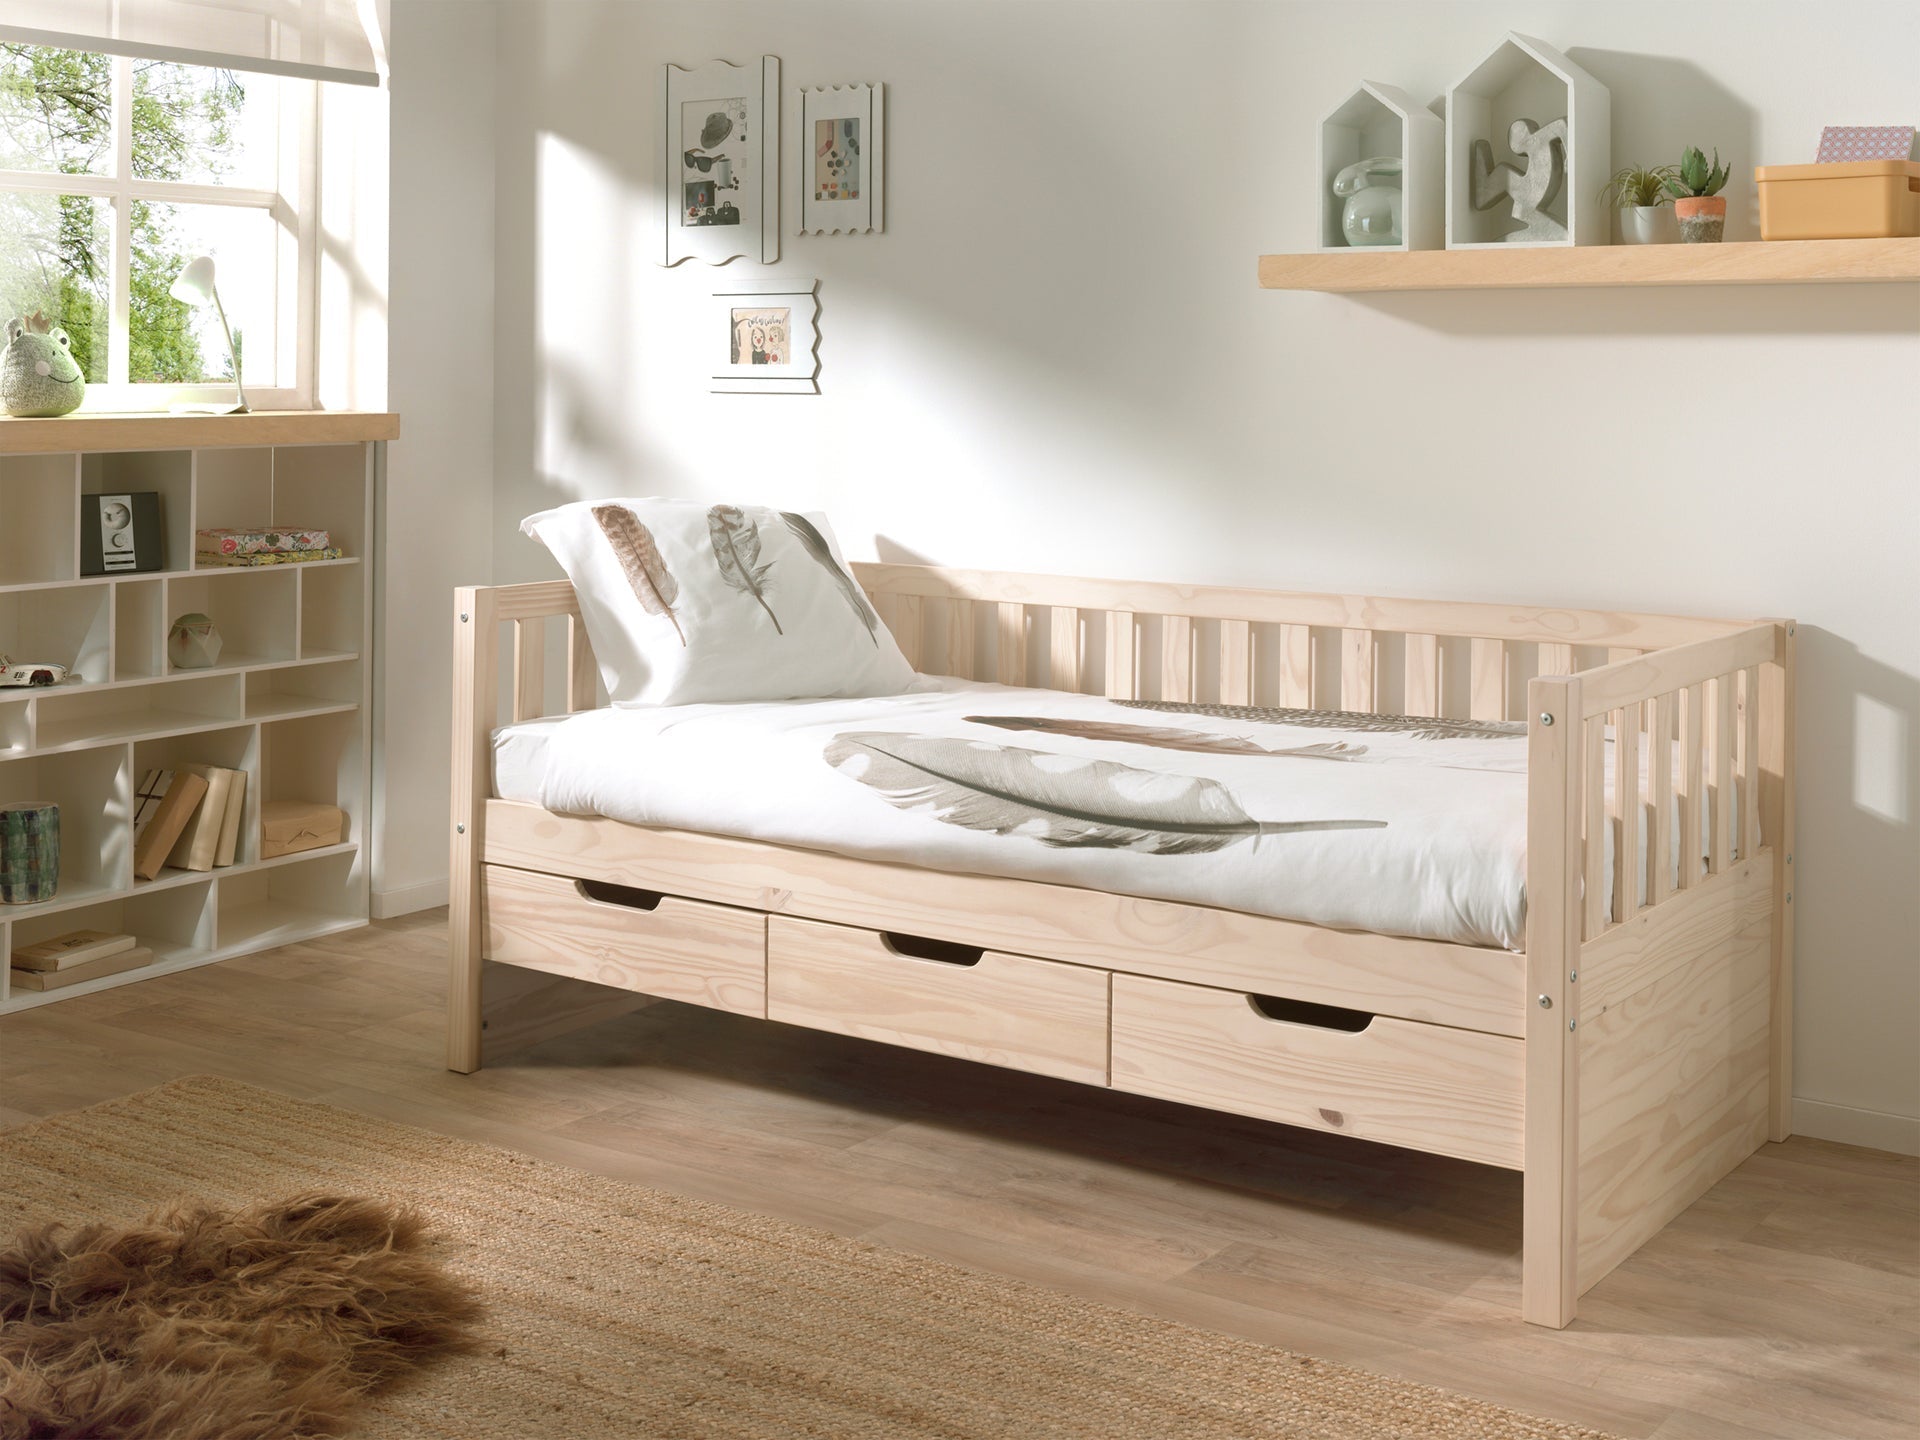 Vipack Fritz Kids Captain Bed with Drawers - Natural Pine